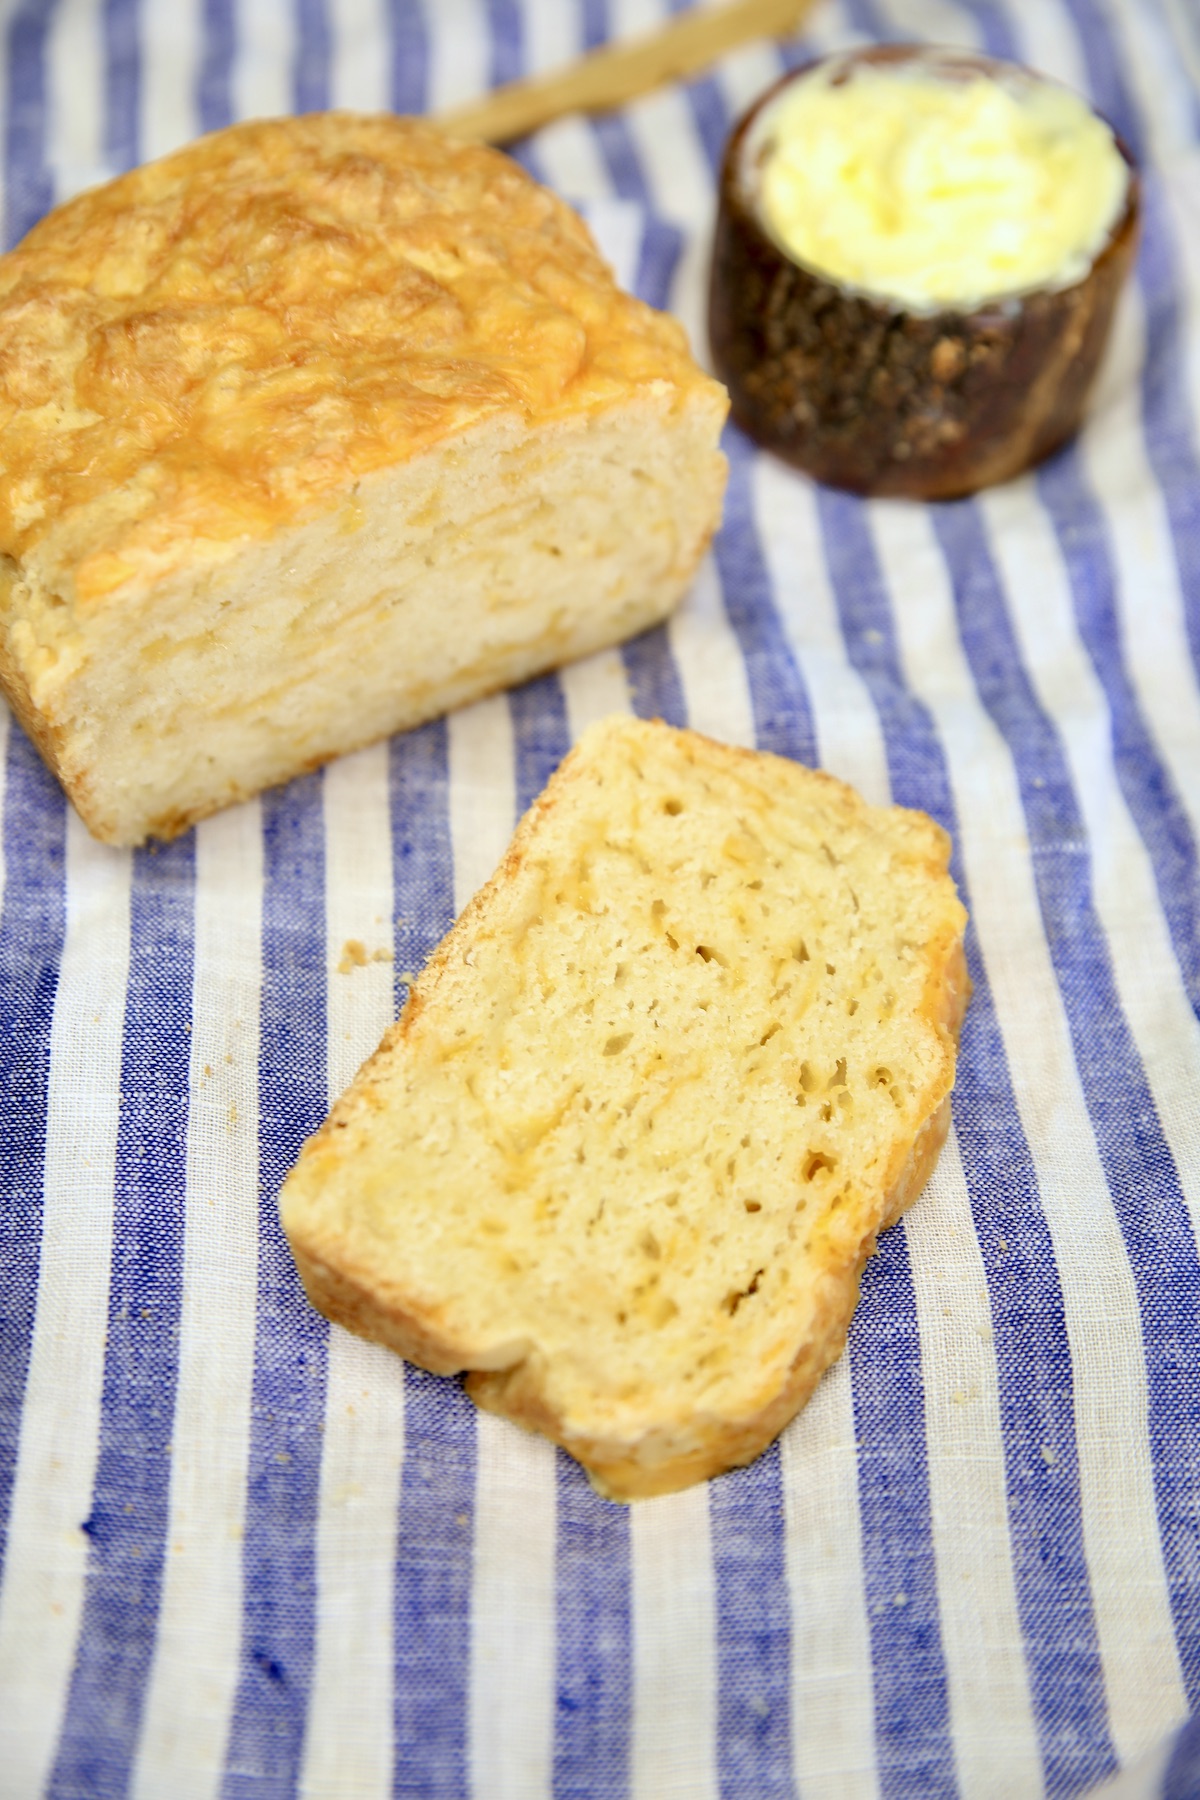 Beer cheese bread with a slice and butter.